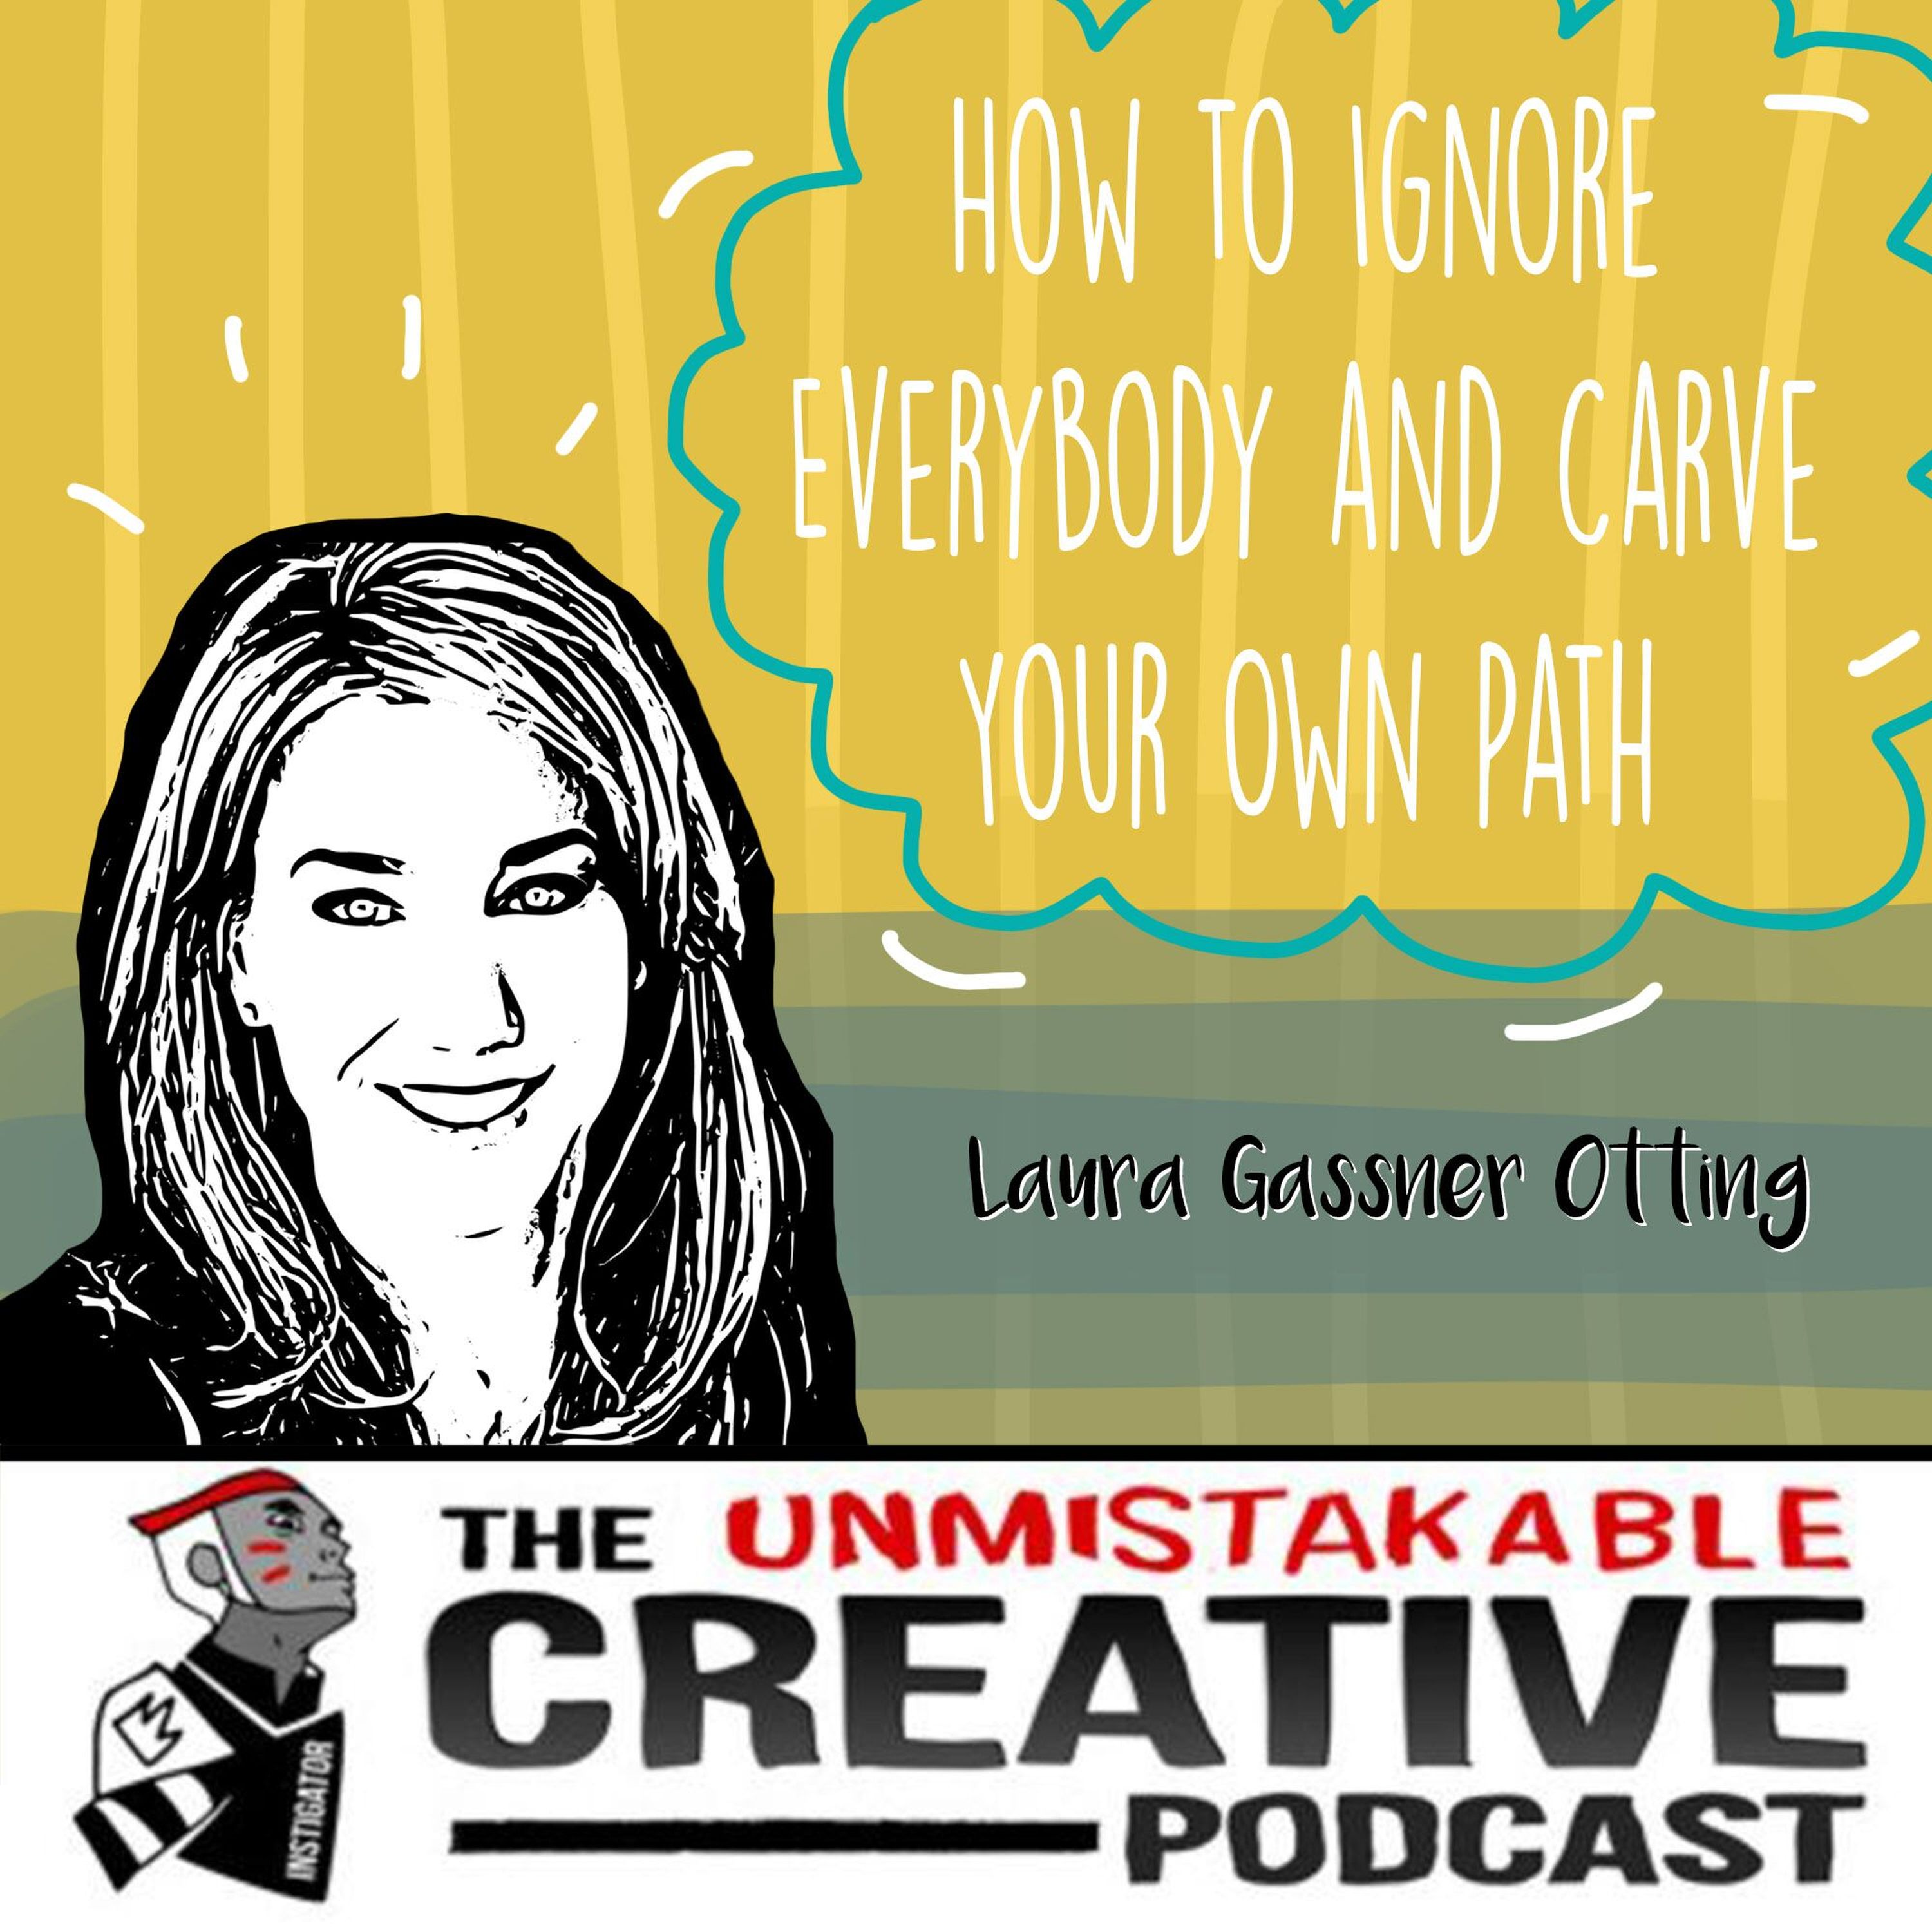 How to Ignore Everybody and Carve Your Own Path with Laura Gassner Otting